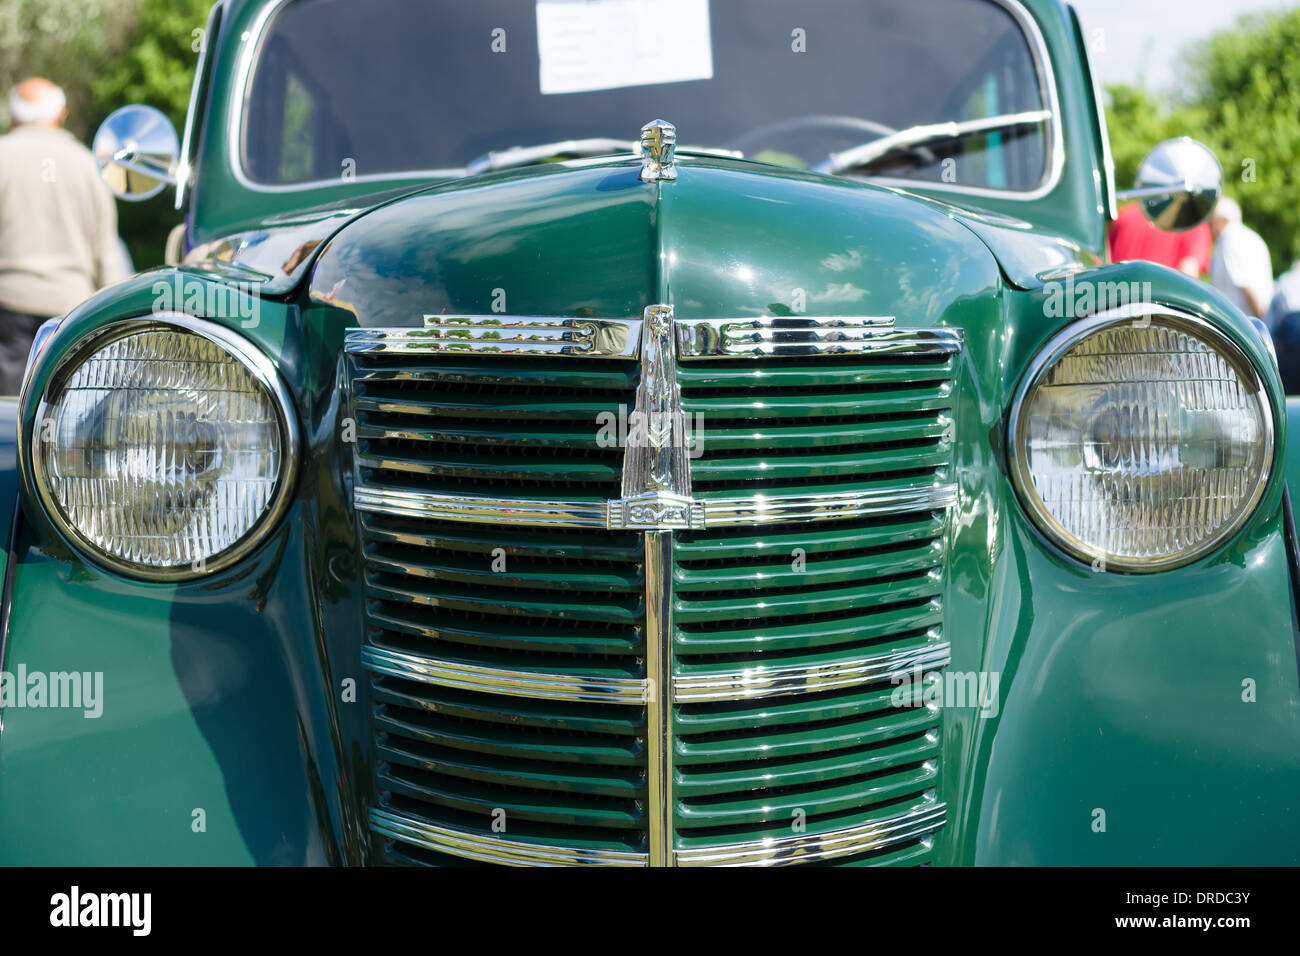 Page 2 - Moskvitch Car High Resolution Stock Photography and Images - Alamy